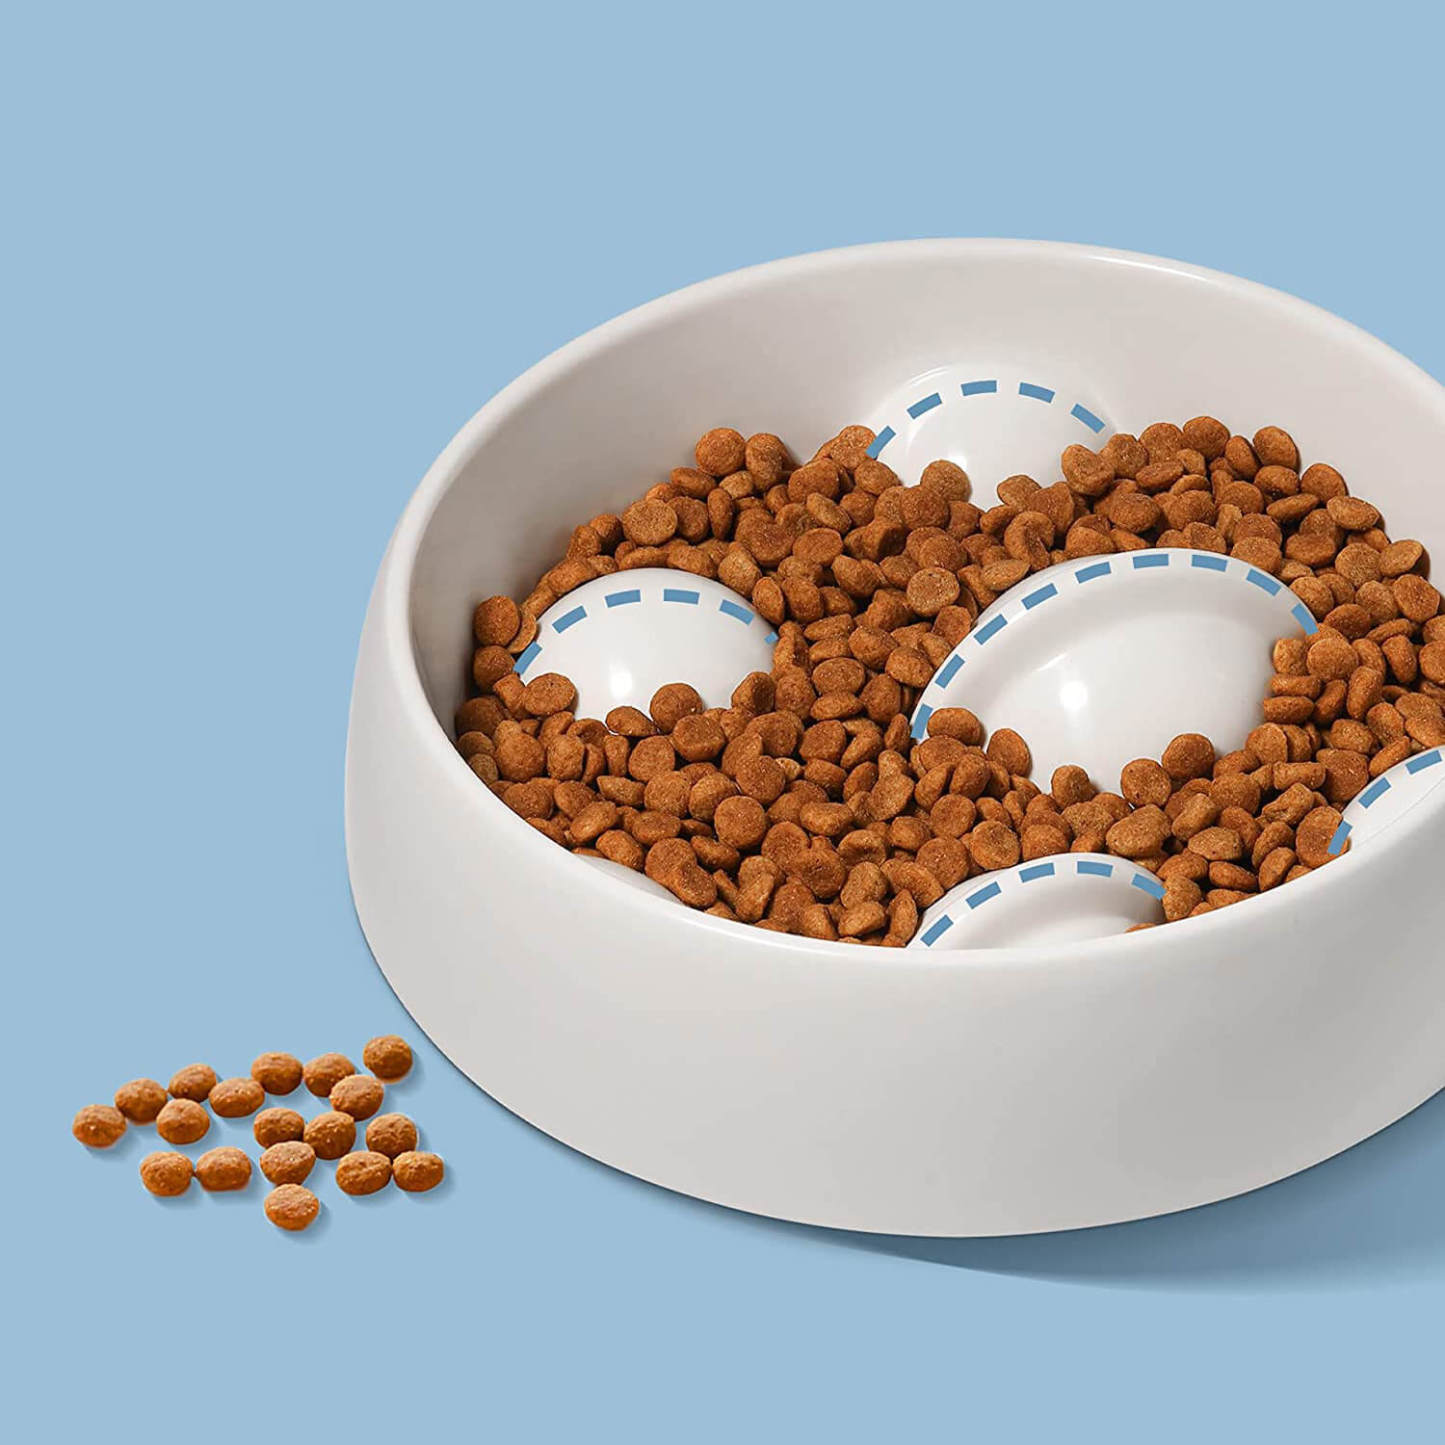 White dog bowl with many protrusions filled with dog food. Explain why it could have a longer eating time.